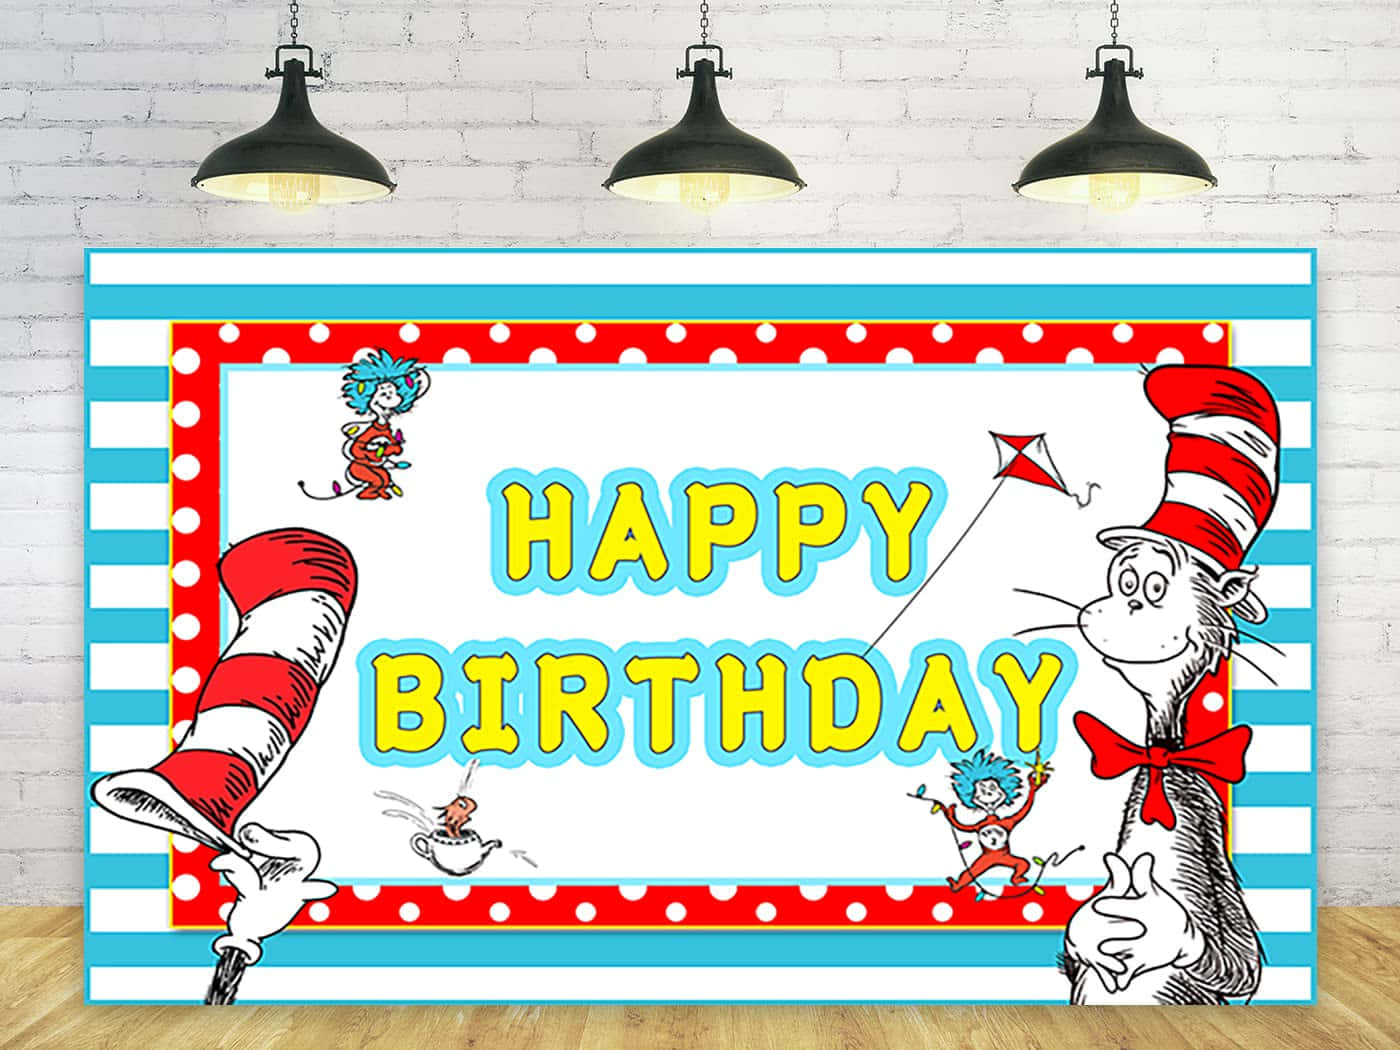 Dr Seuss Birthday Party Backdrop With A Cat In The Hat